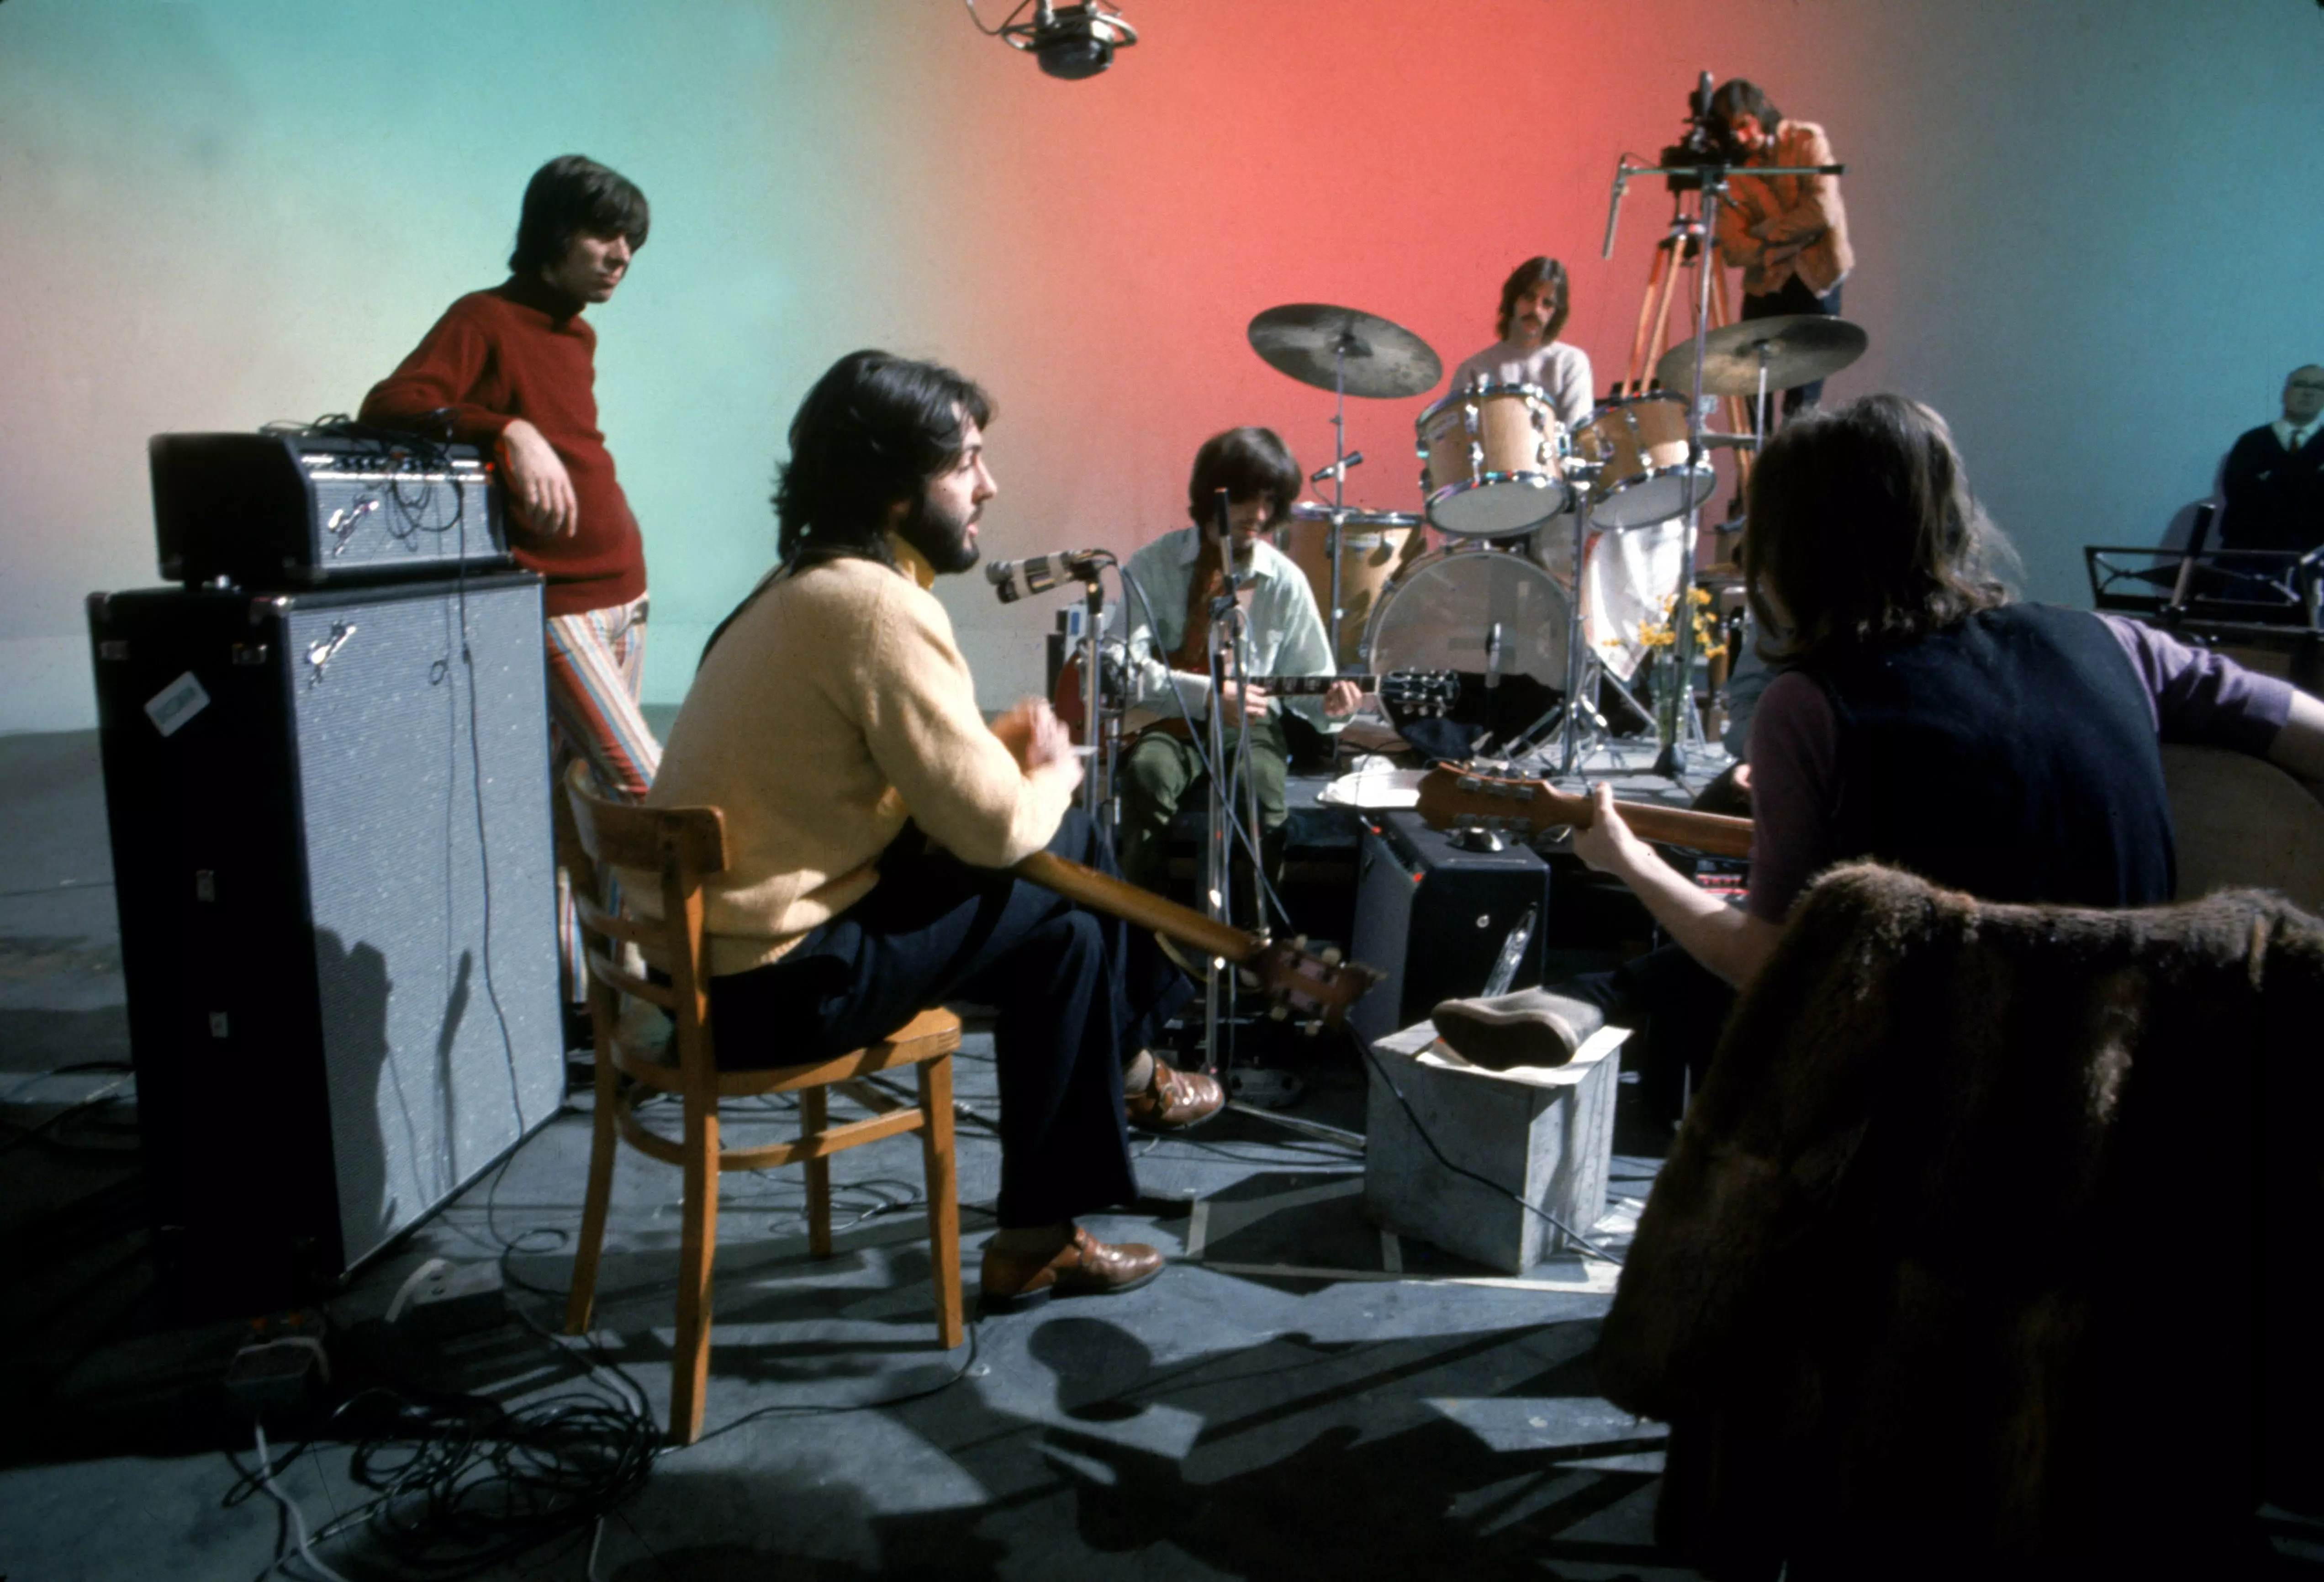 5 Lesser Known Facts About The Beatles' 'Let It Be' Era: Watch The Restored 1970 Film